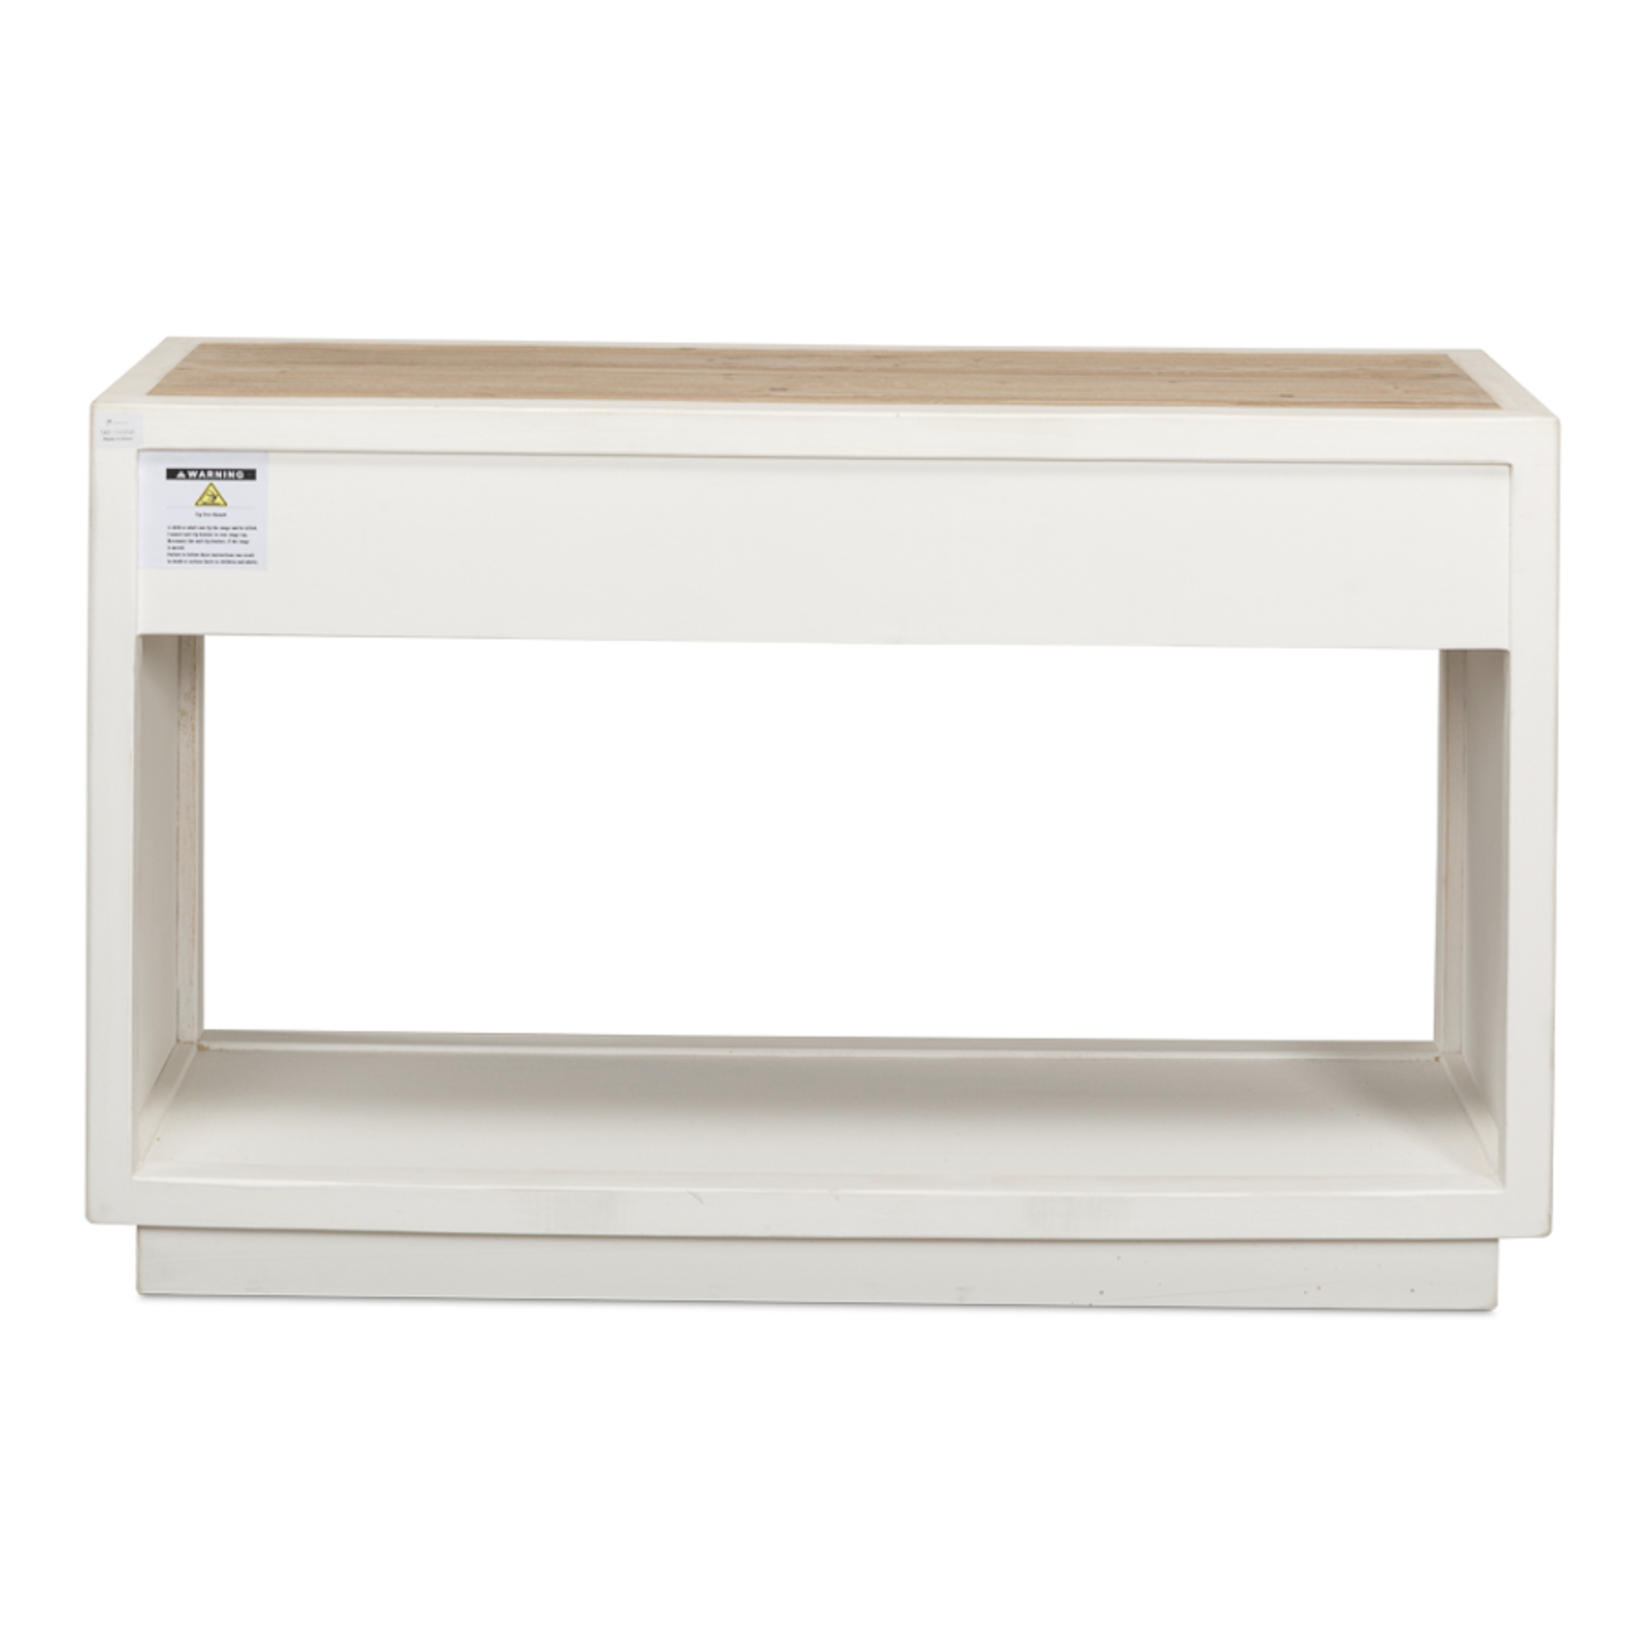 Outside The Box 48x16x30 Connor Antique White Center Drawer Weathered Top Console Table